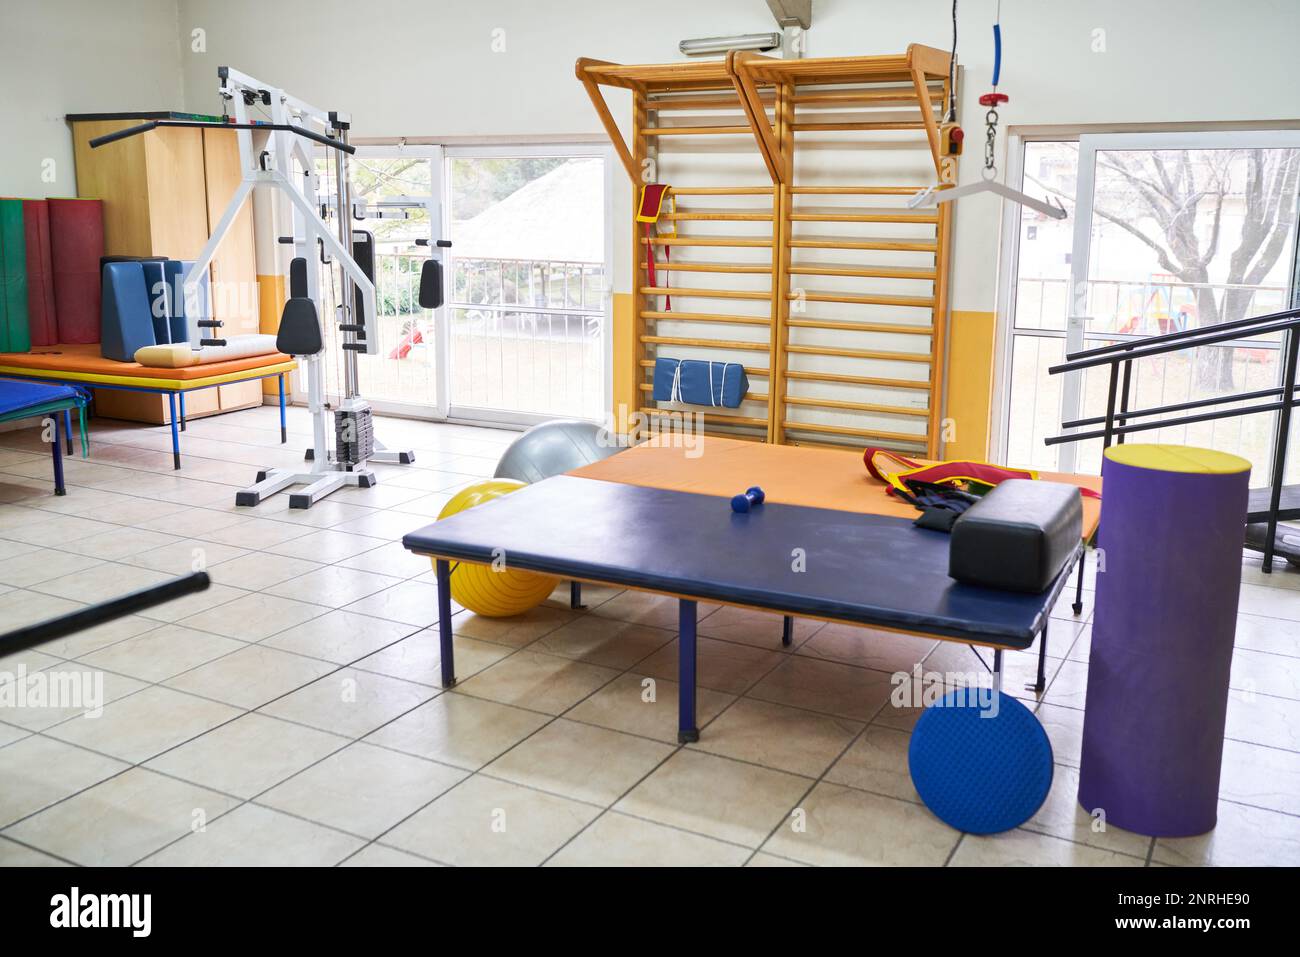 Interior of rehabilitation center with various exercise equipment and bed in room Stock Photo